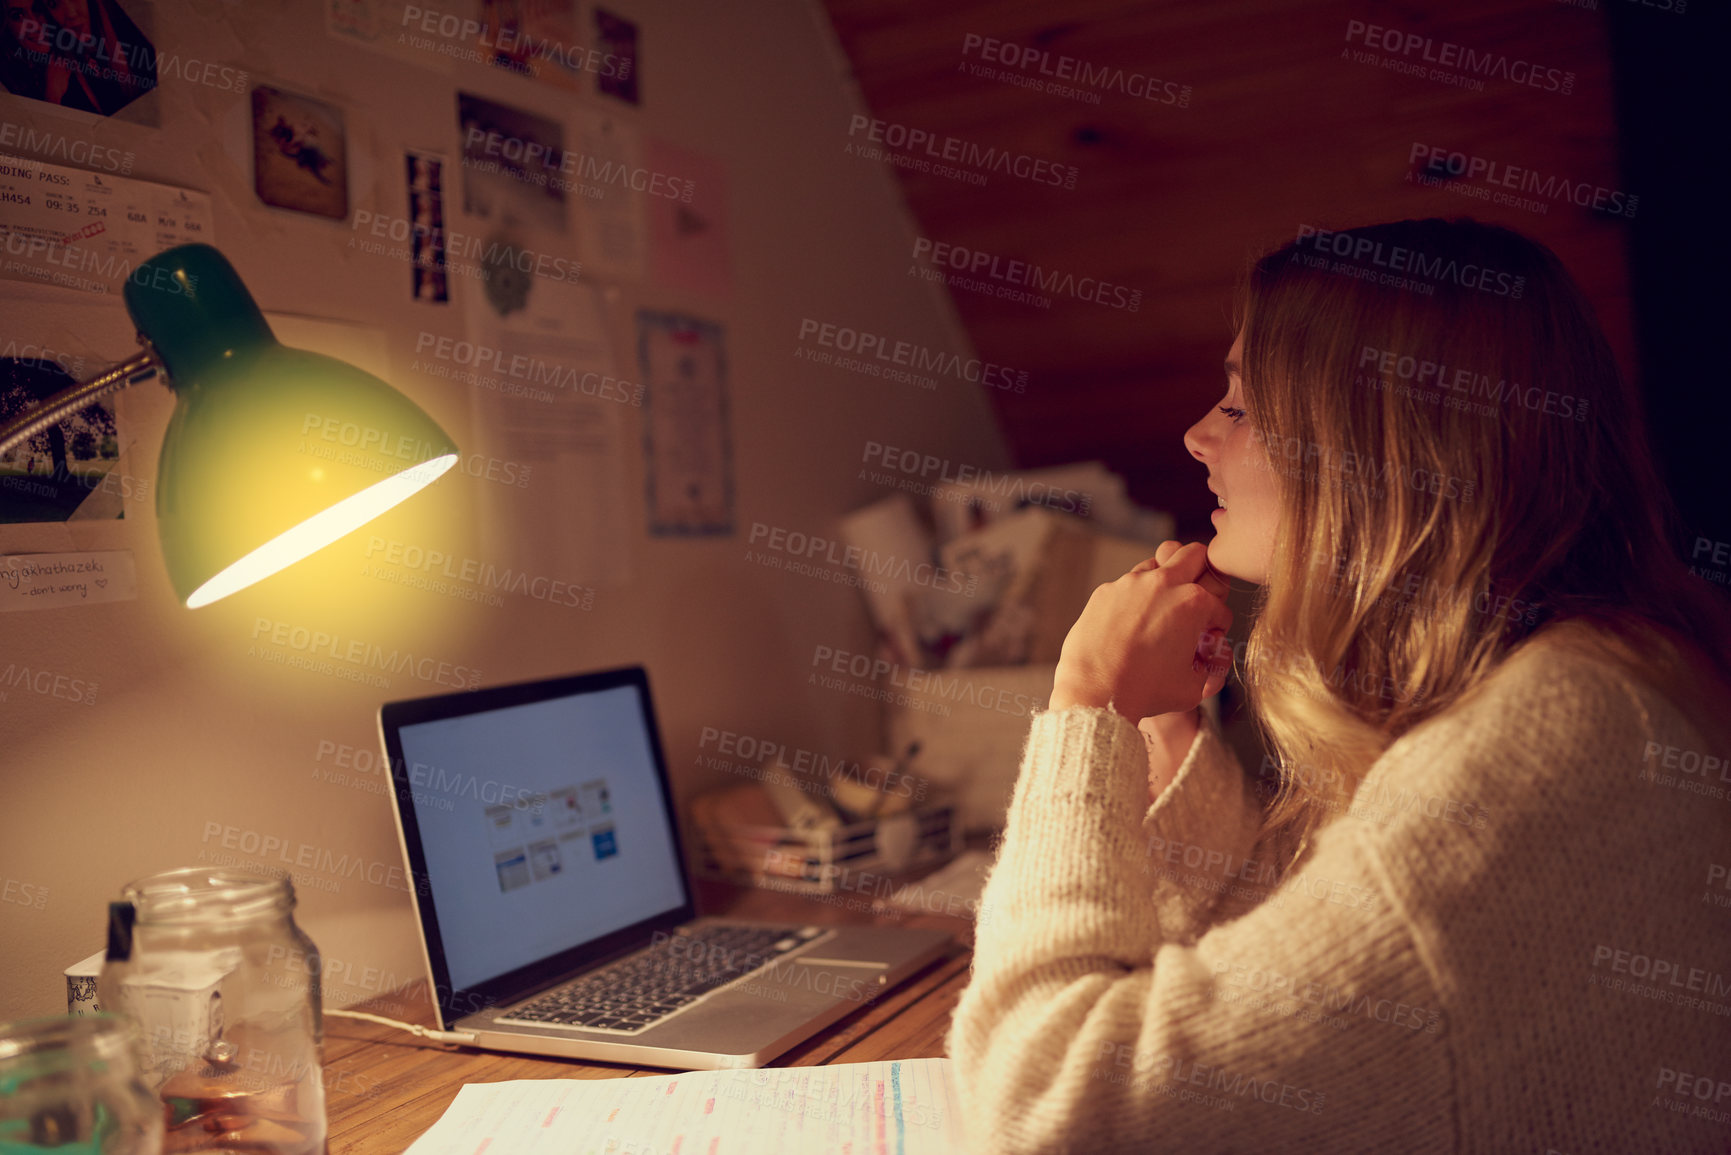 Buy stock photo Studying, girl and laptop at desk at night for assessment, exams and thinking in bedroom. Computer, lamp and female student in dark for education, learning and research for assignment or deadline